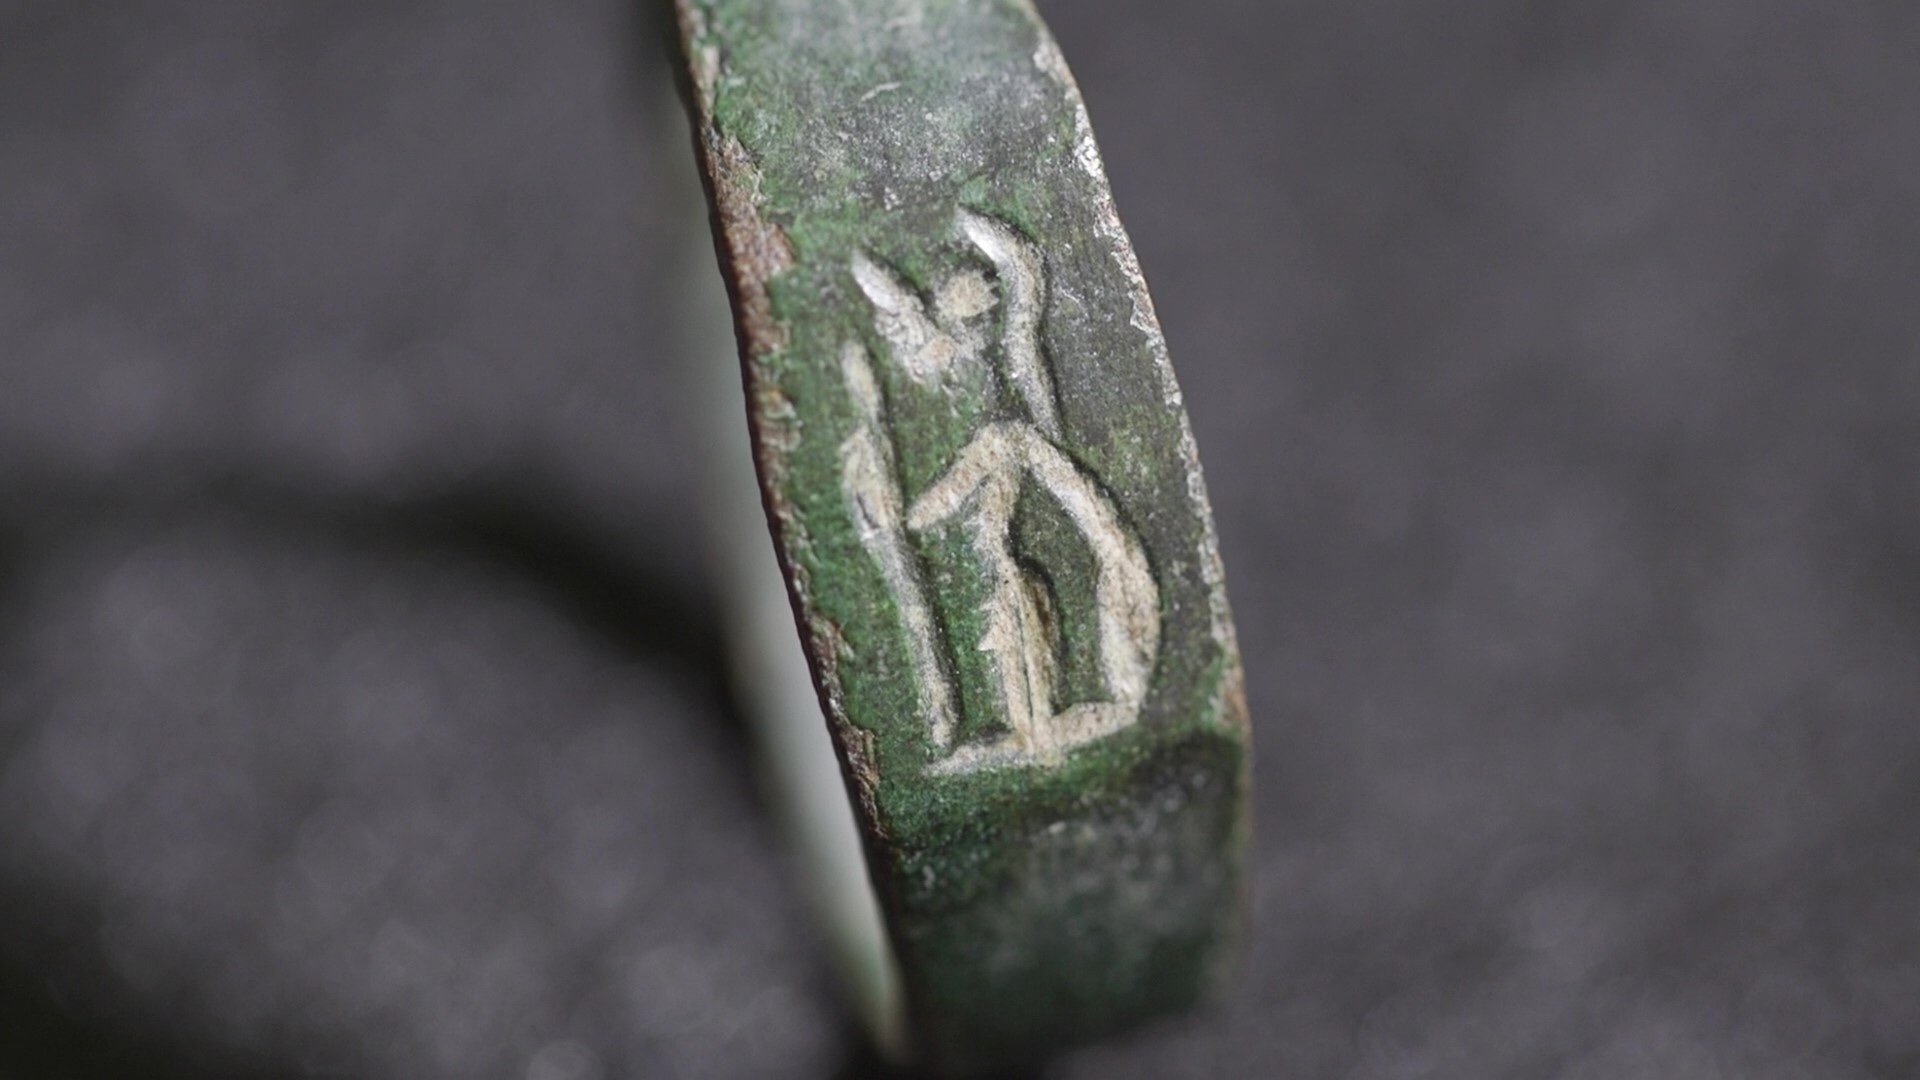  1,800-year-old ring depicting Roman goddess discovered by ancient quarry in Israel 